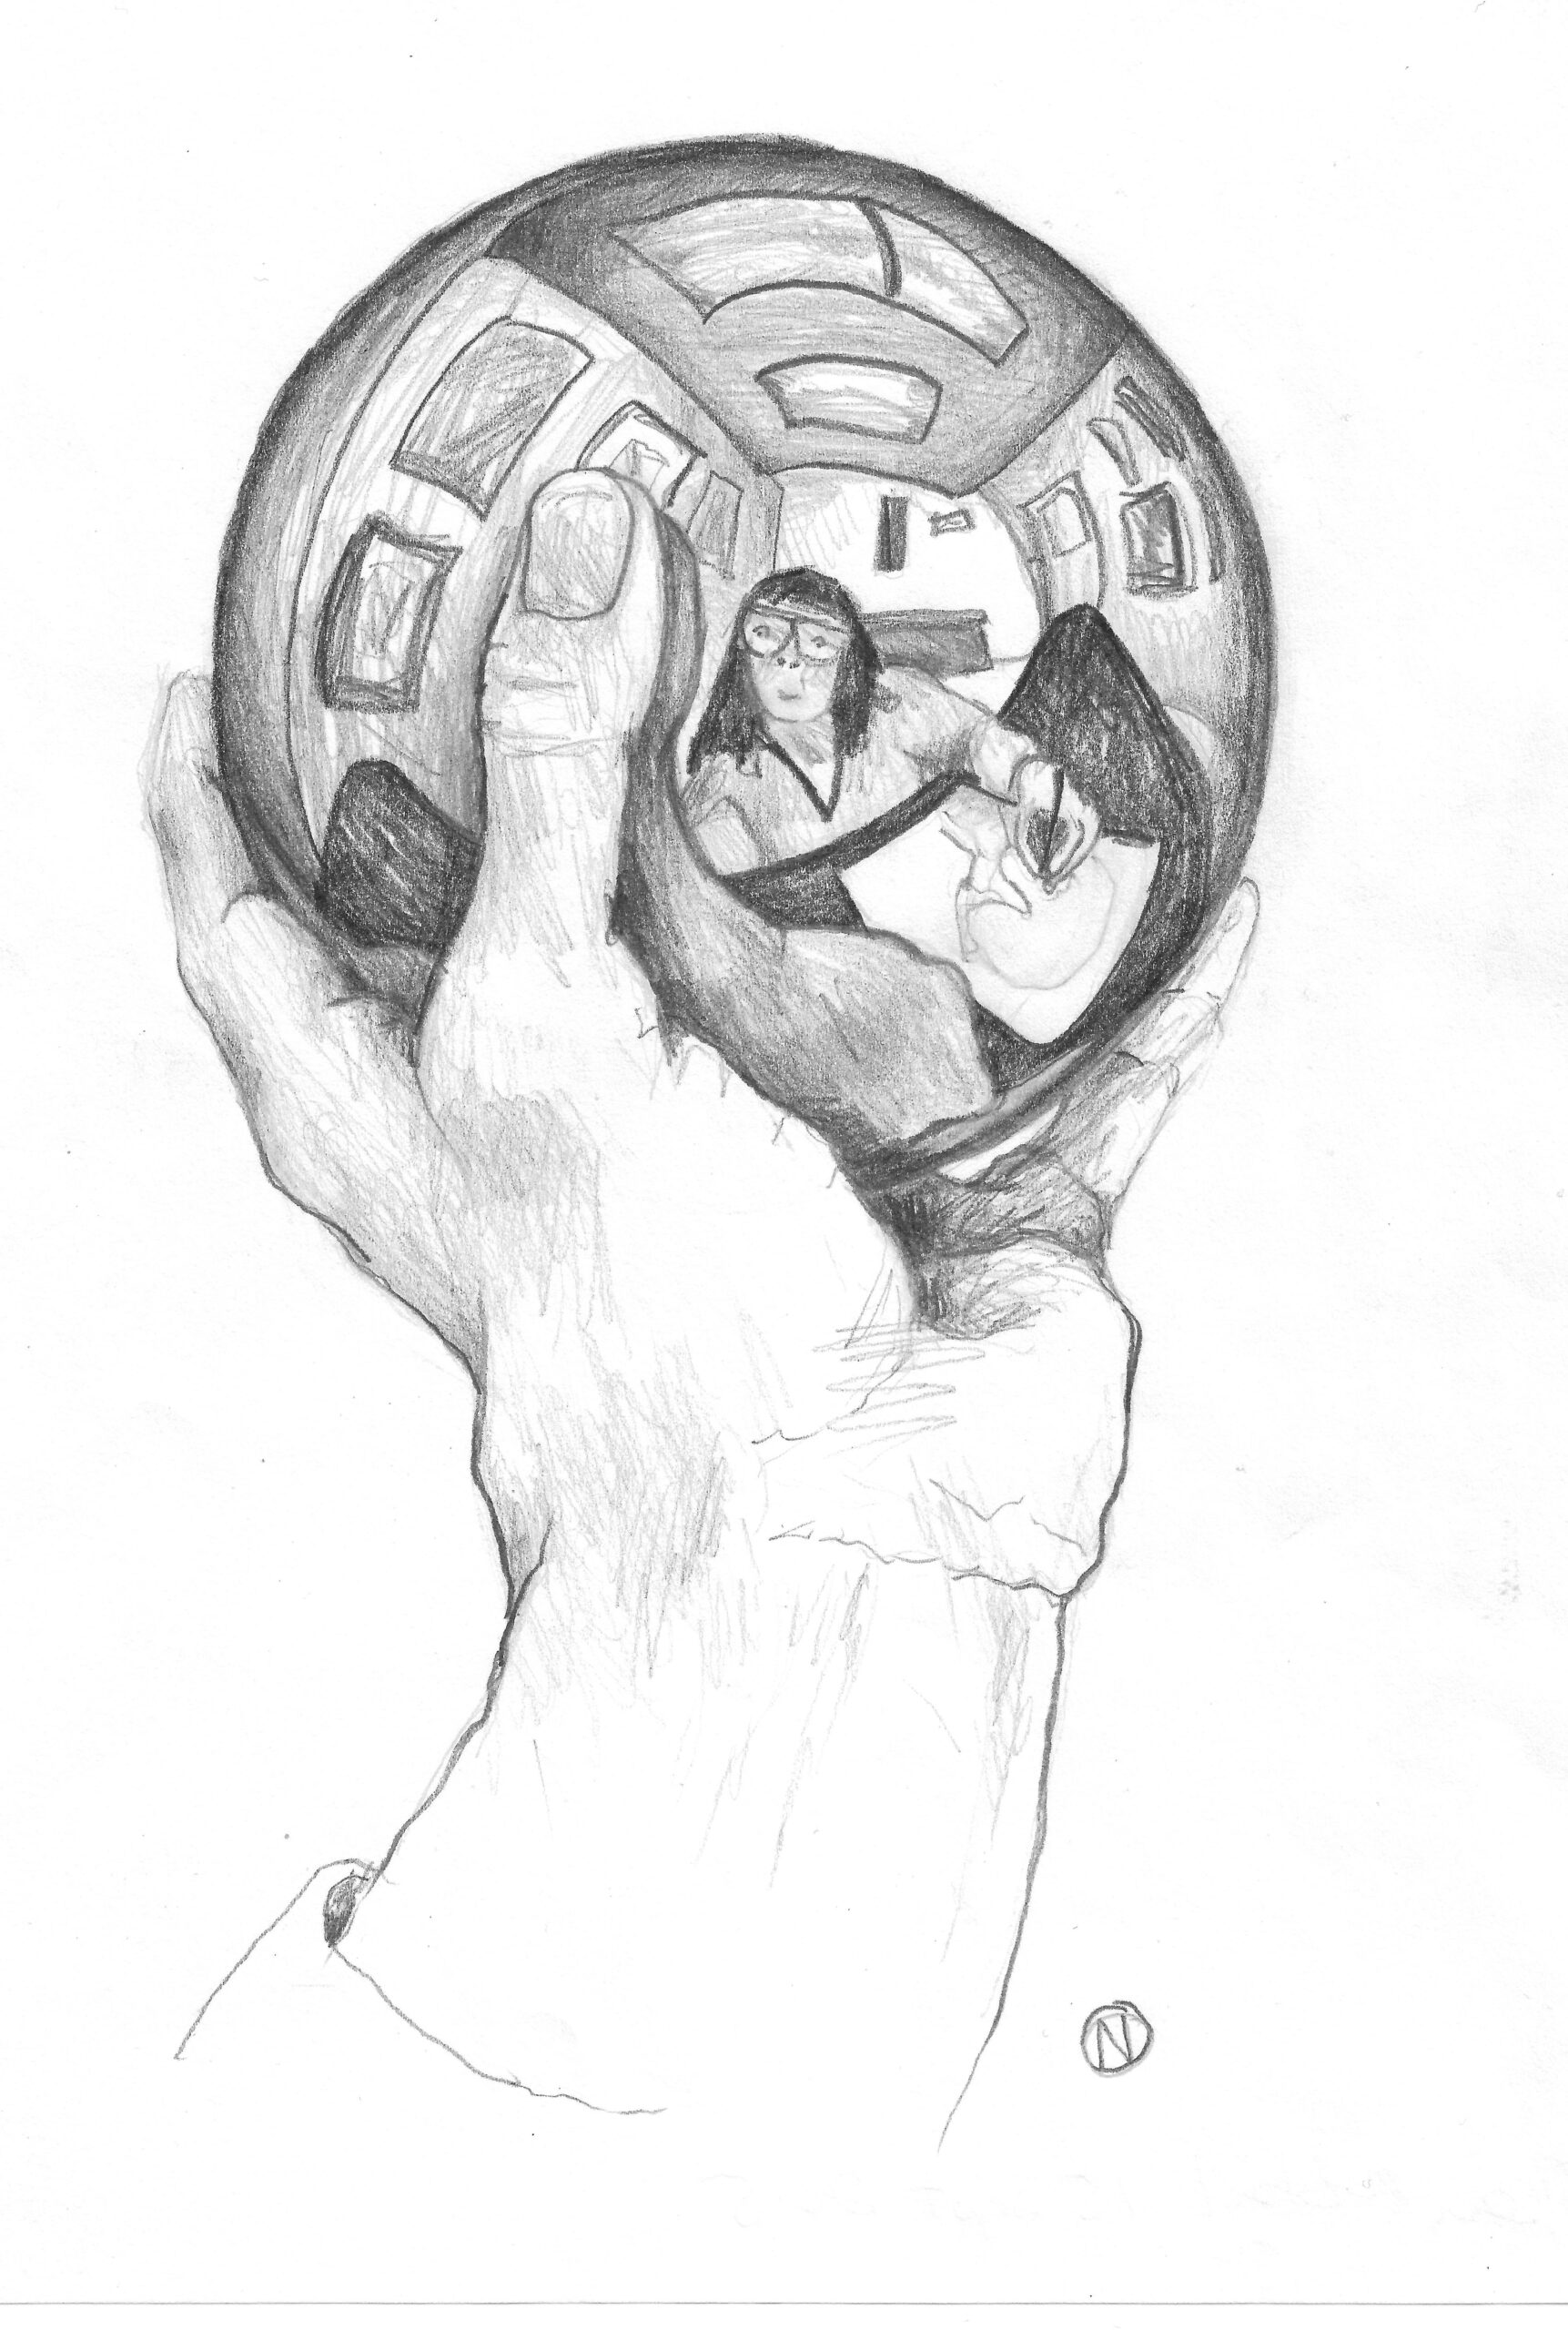 A drawing of a hand holding a glass ball with the artist's reflection on the glass.